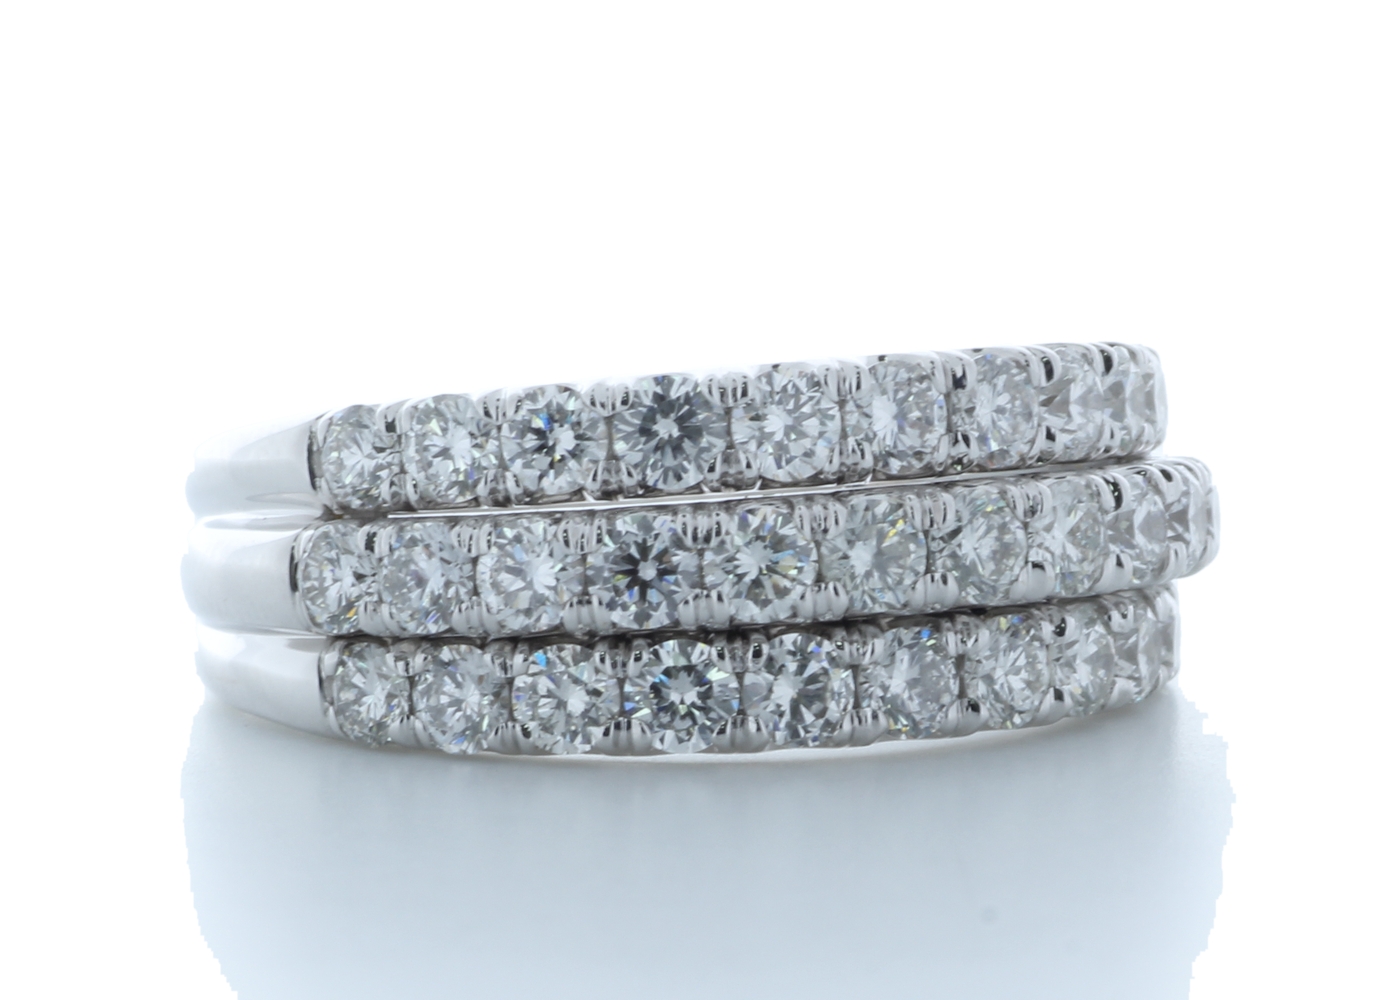 18ct White Gold Channel Set Semi Eternity Diamond Ring 1.61 Carats - Image 4 of 4